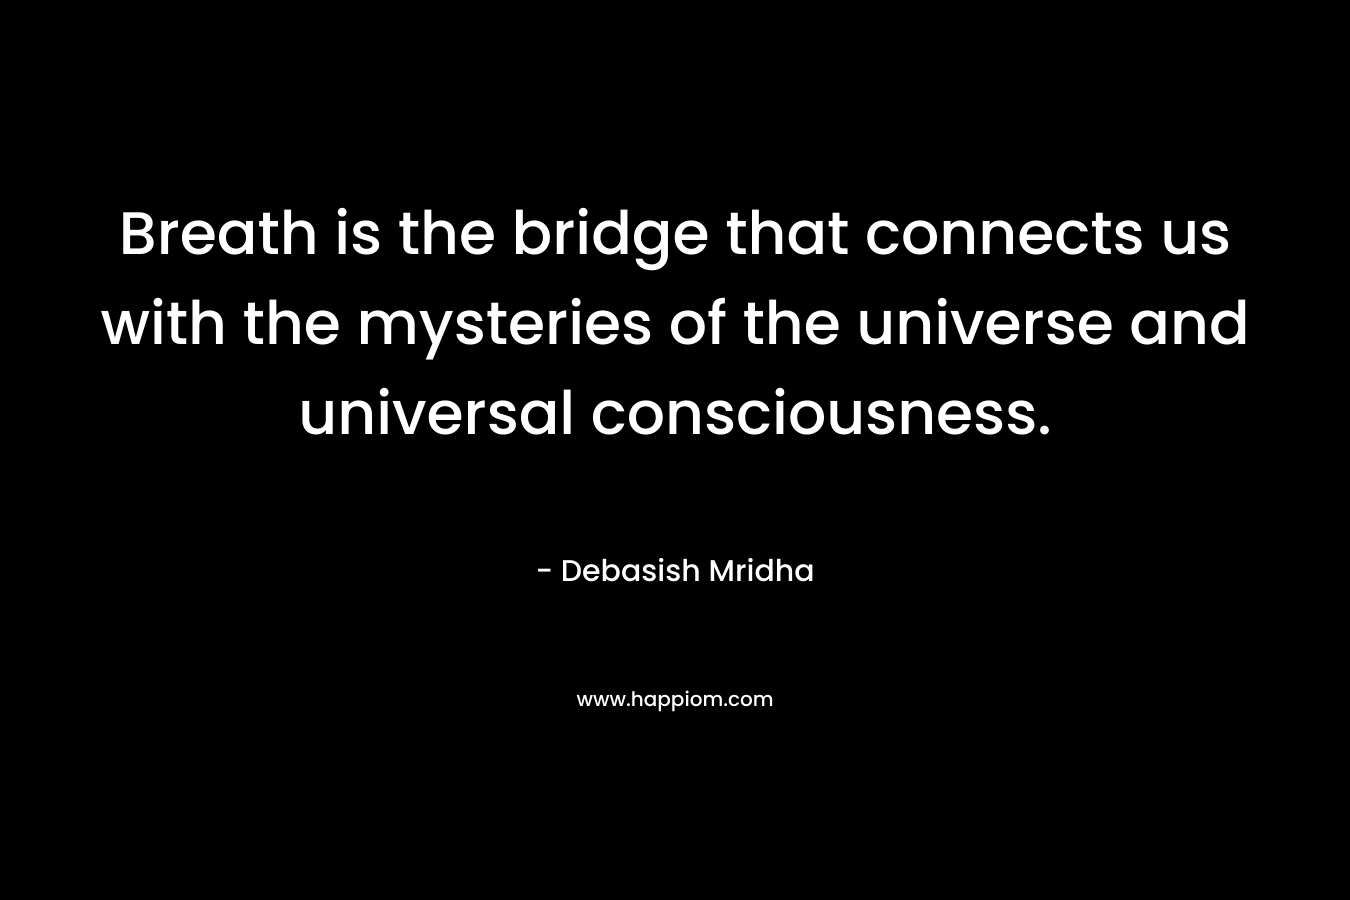 Breath is the bridge that connects us with the mysteries of the universe and universal consciousness.